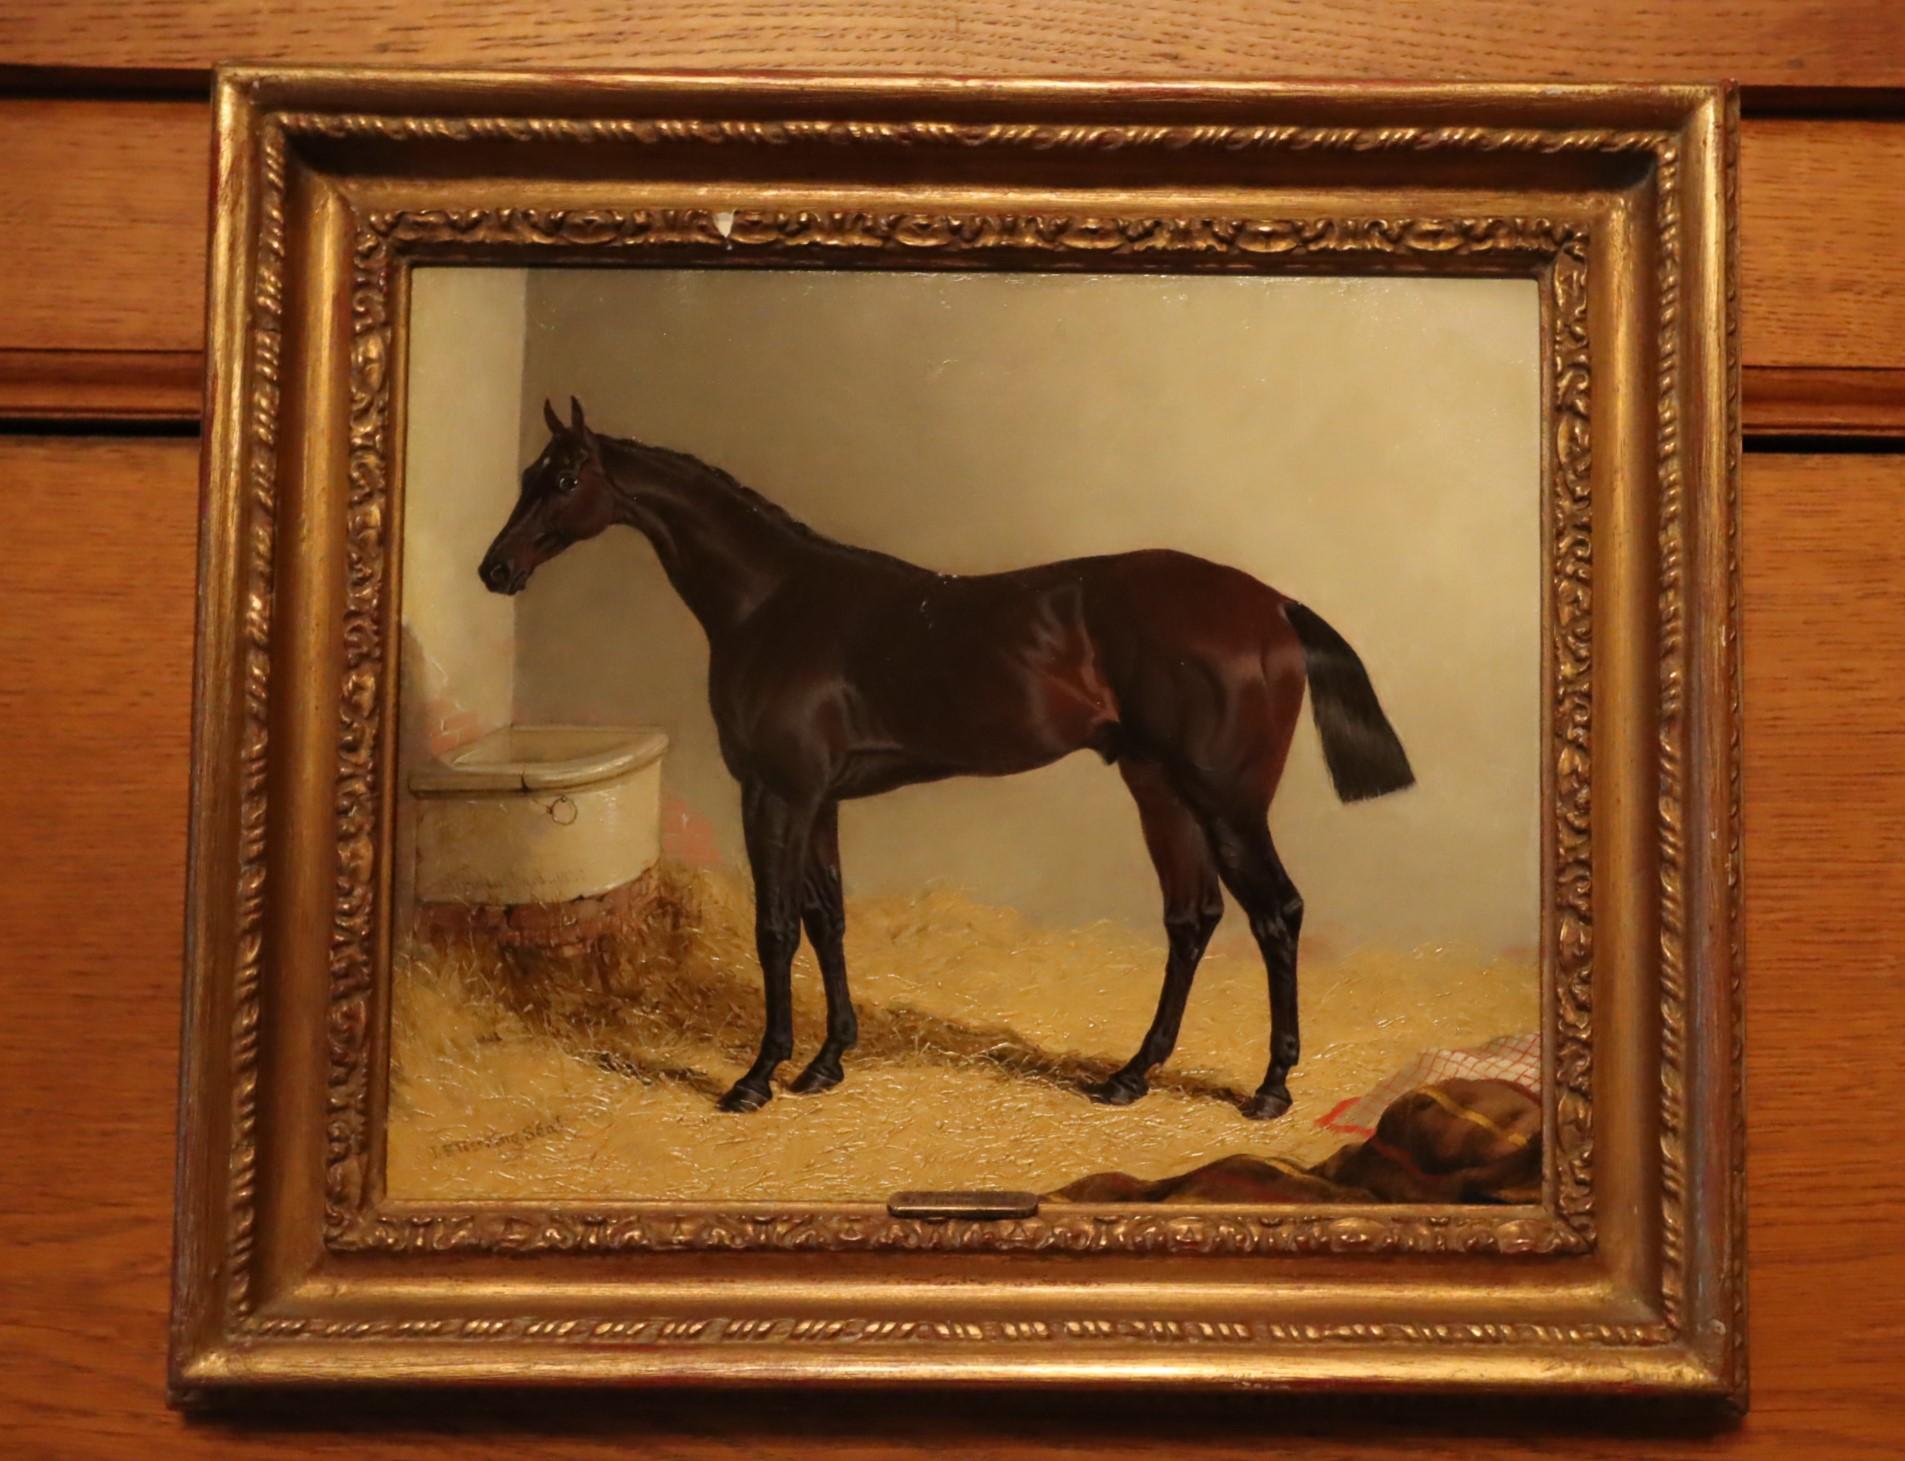 A fine pair of John Frederick Herring Senior 1795-1865
'Birmingham' the winner of the 1830 Saint Leger stakes 
Signed & Dated 1830
'Foig a Ballagh' in a stable
Signed & Dated 1842
Both are 24cm x 29.5cm
Both are Oil on Panel
Both are Framed
